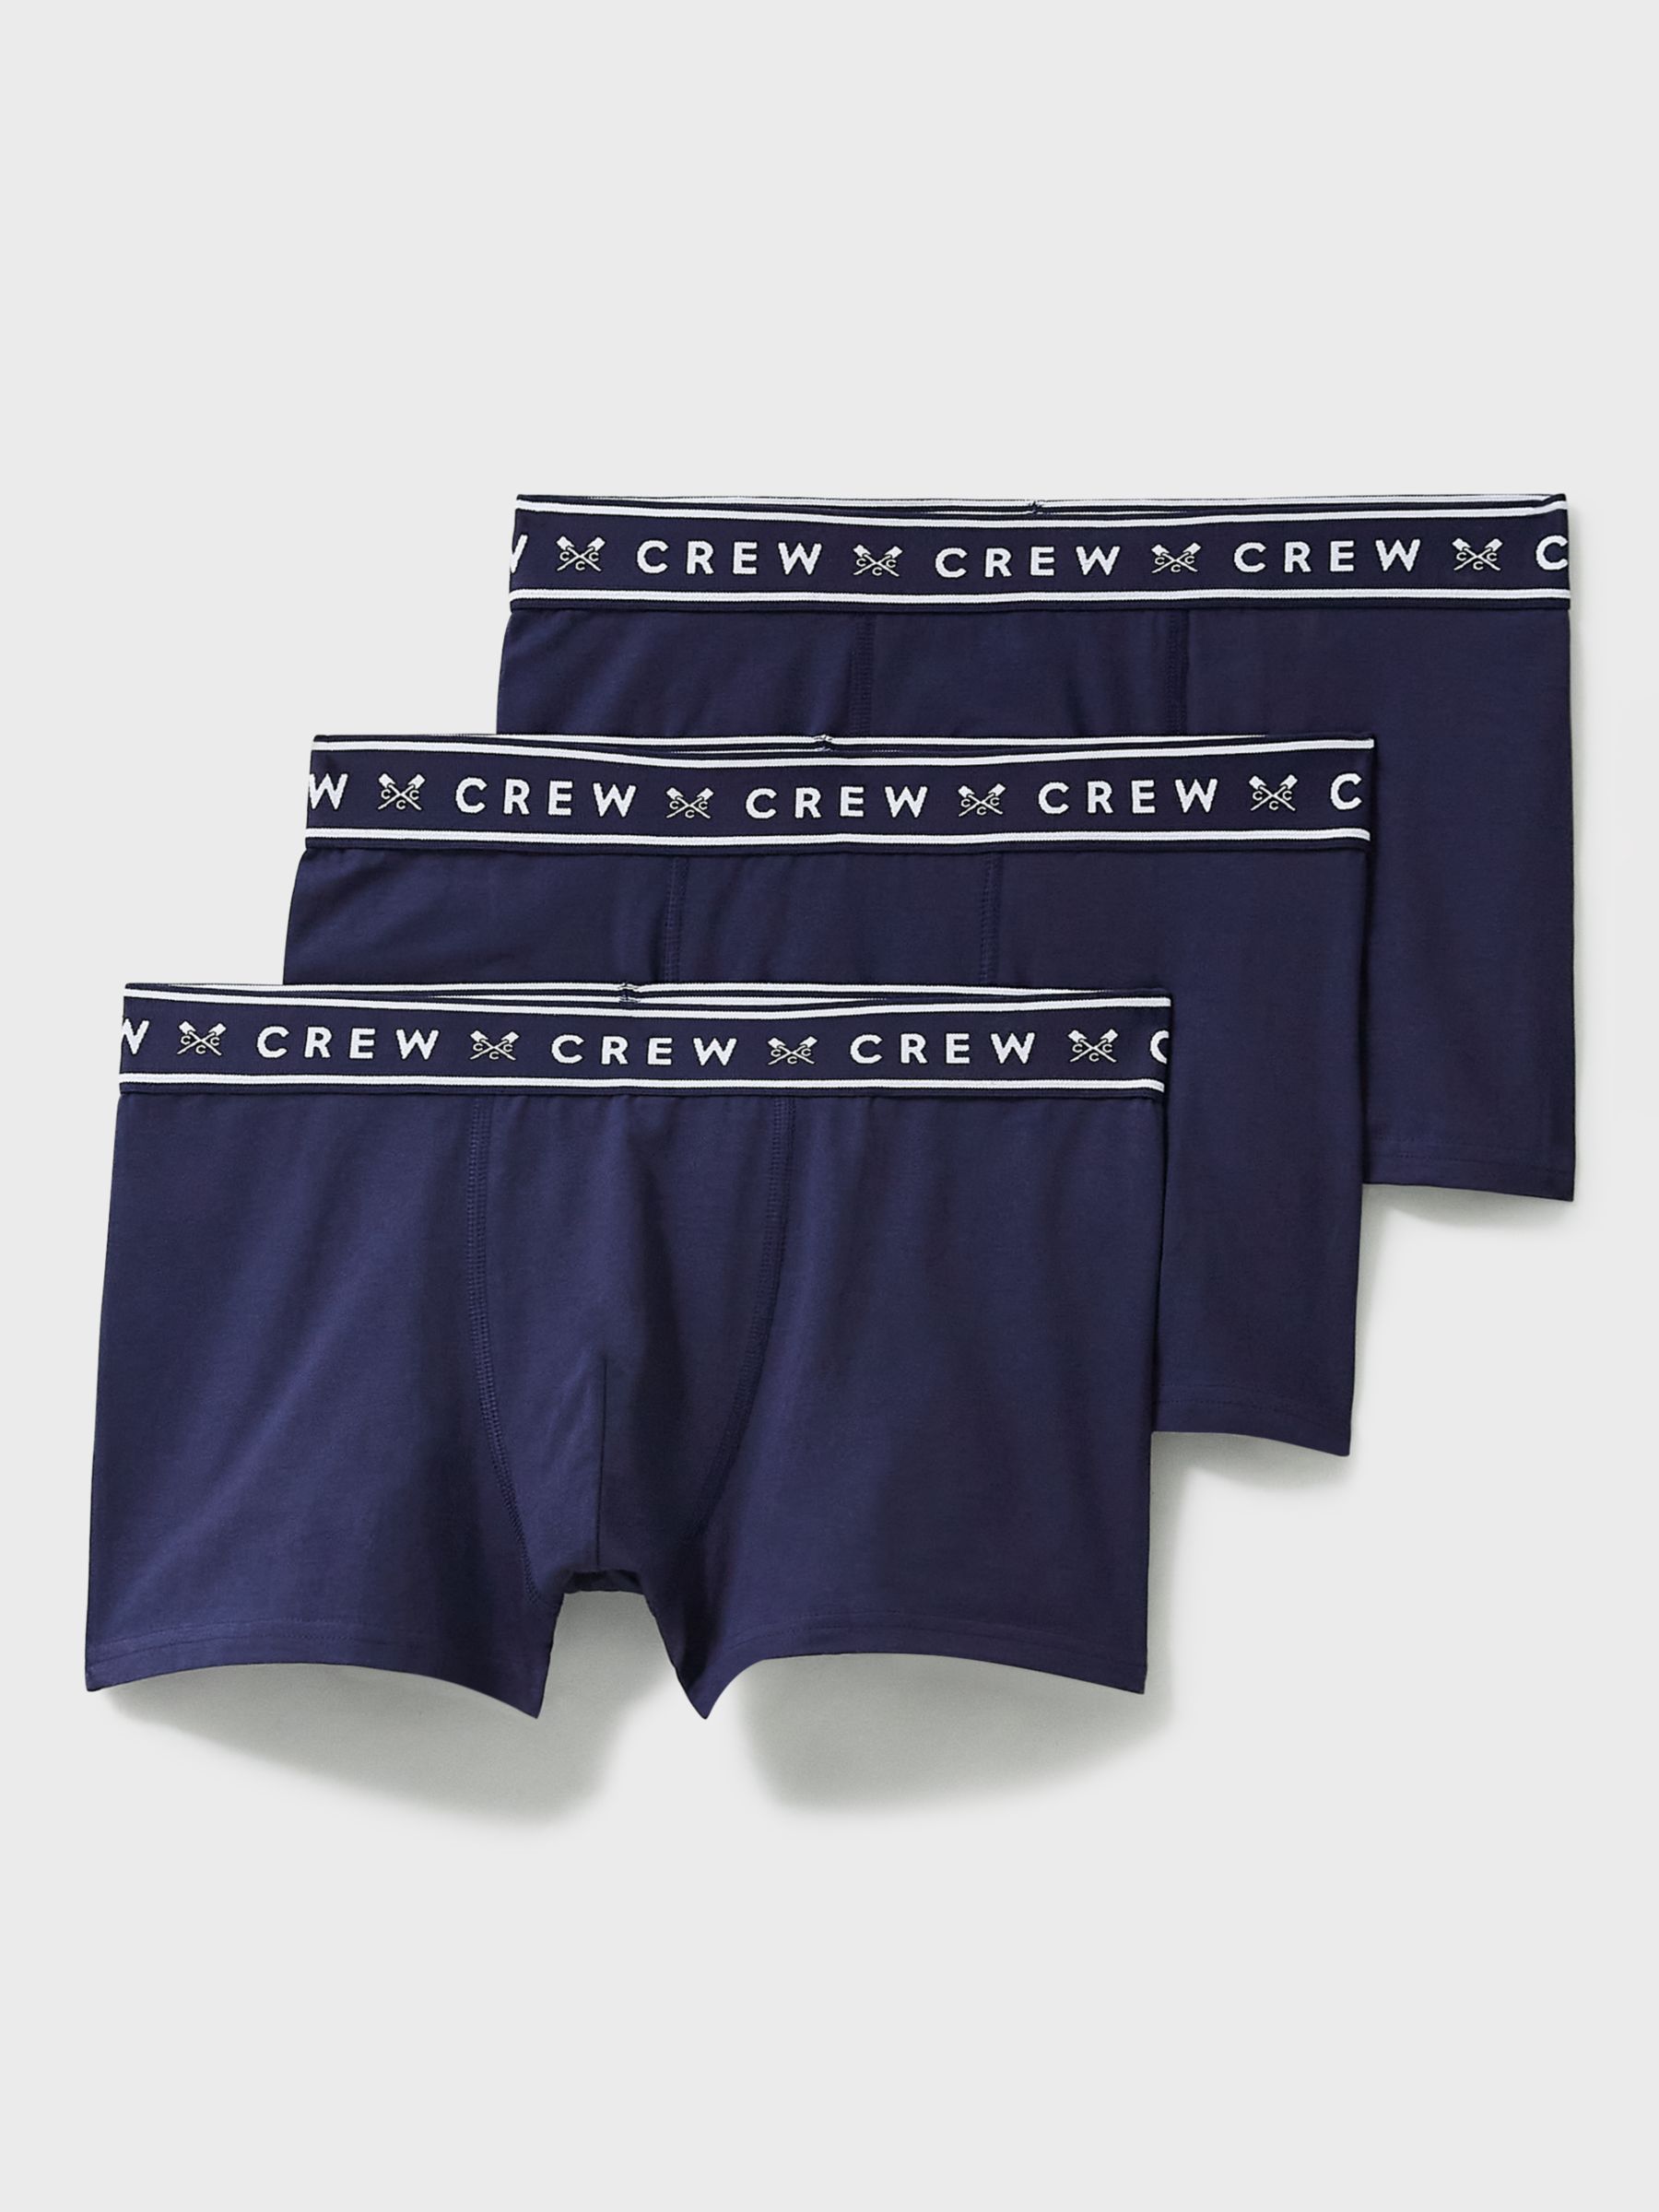 Crew Clothing Jersey Boxers, Pack of 3, Navy Blue, S